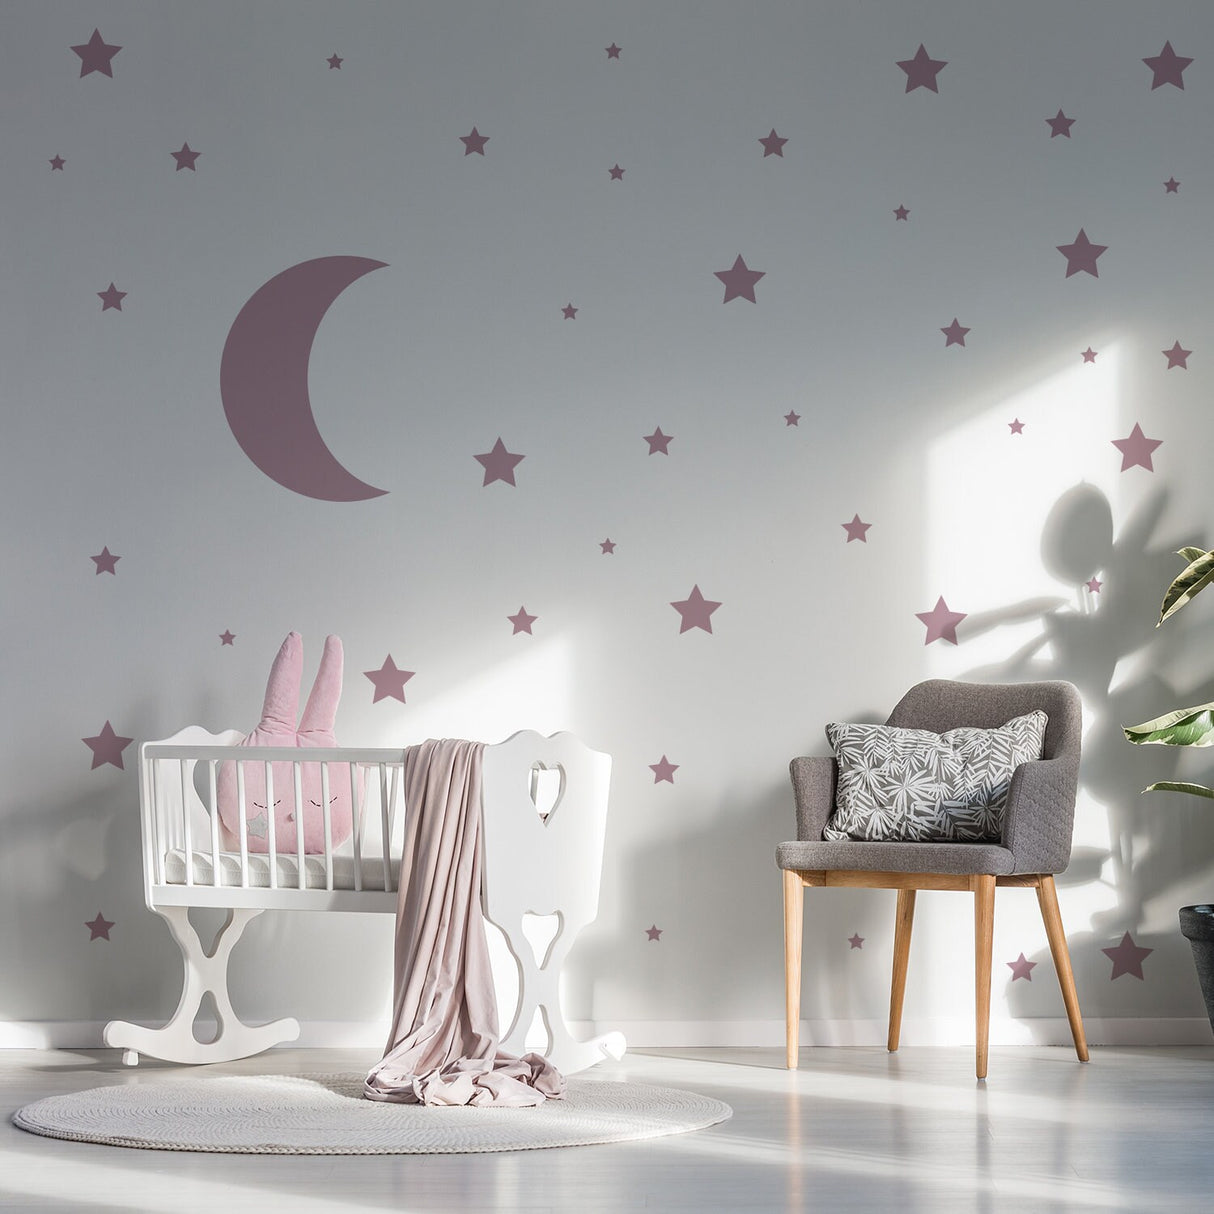 115x Star Wall Stickers - Baby Shower Moon Set Decorative Vinyl Decal